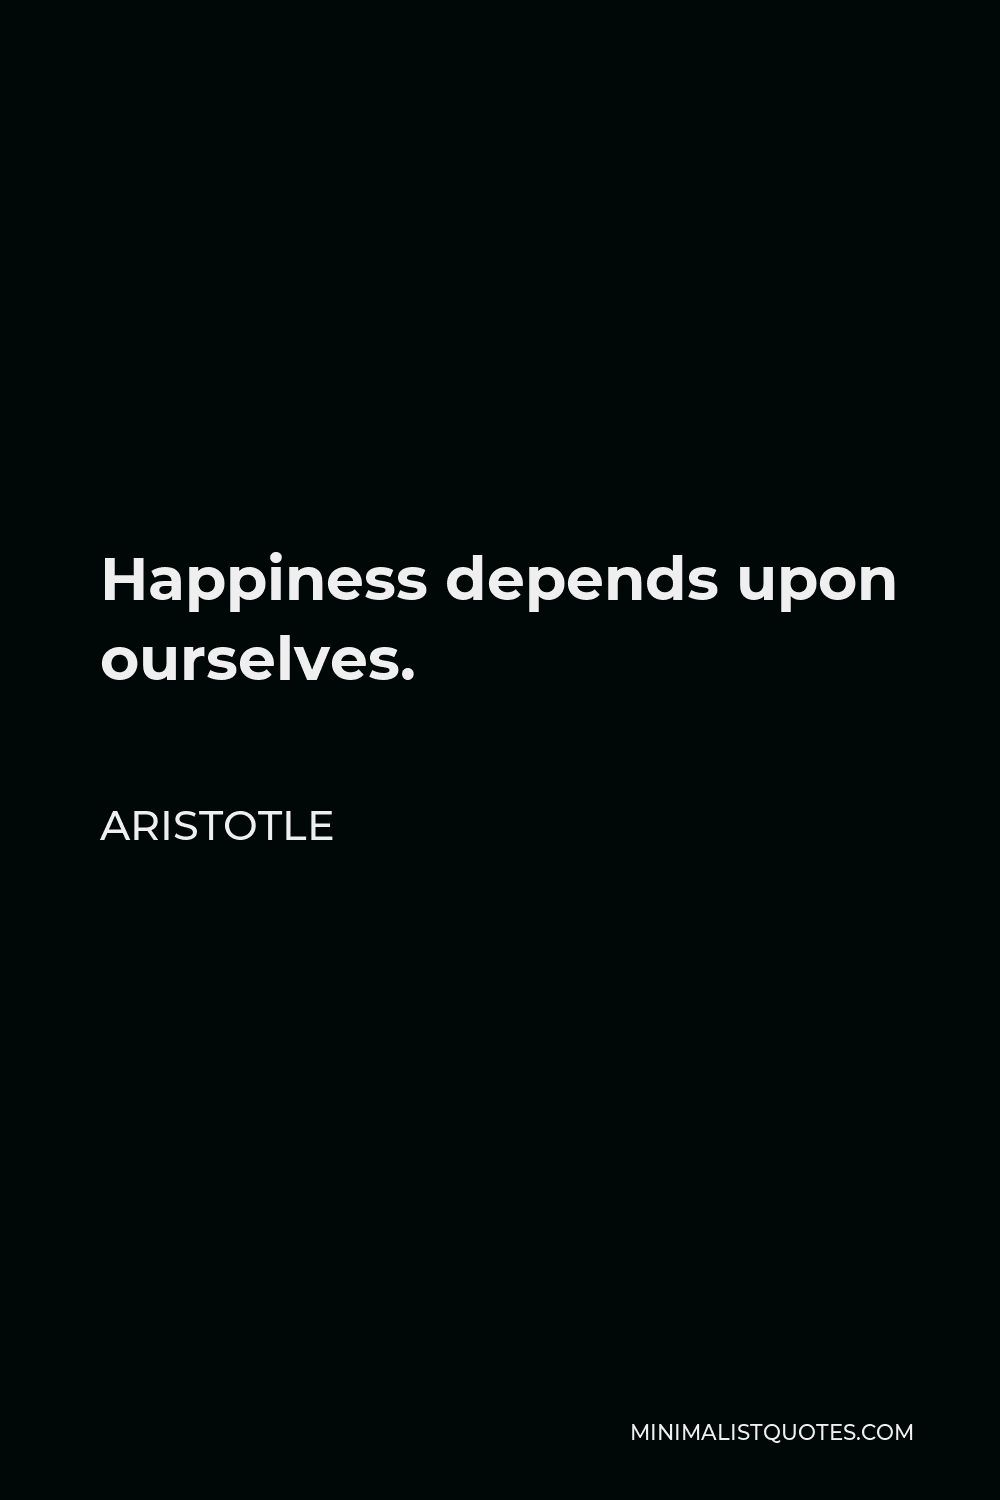 Aristotle Quote - Happiness depends upon ourselves.